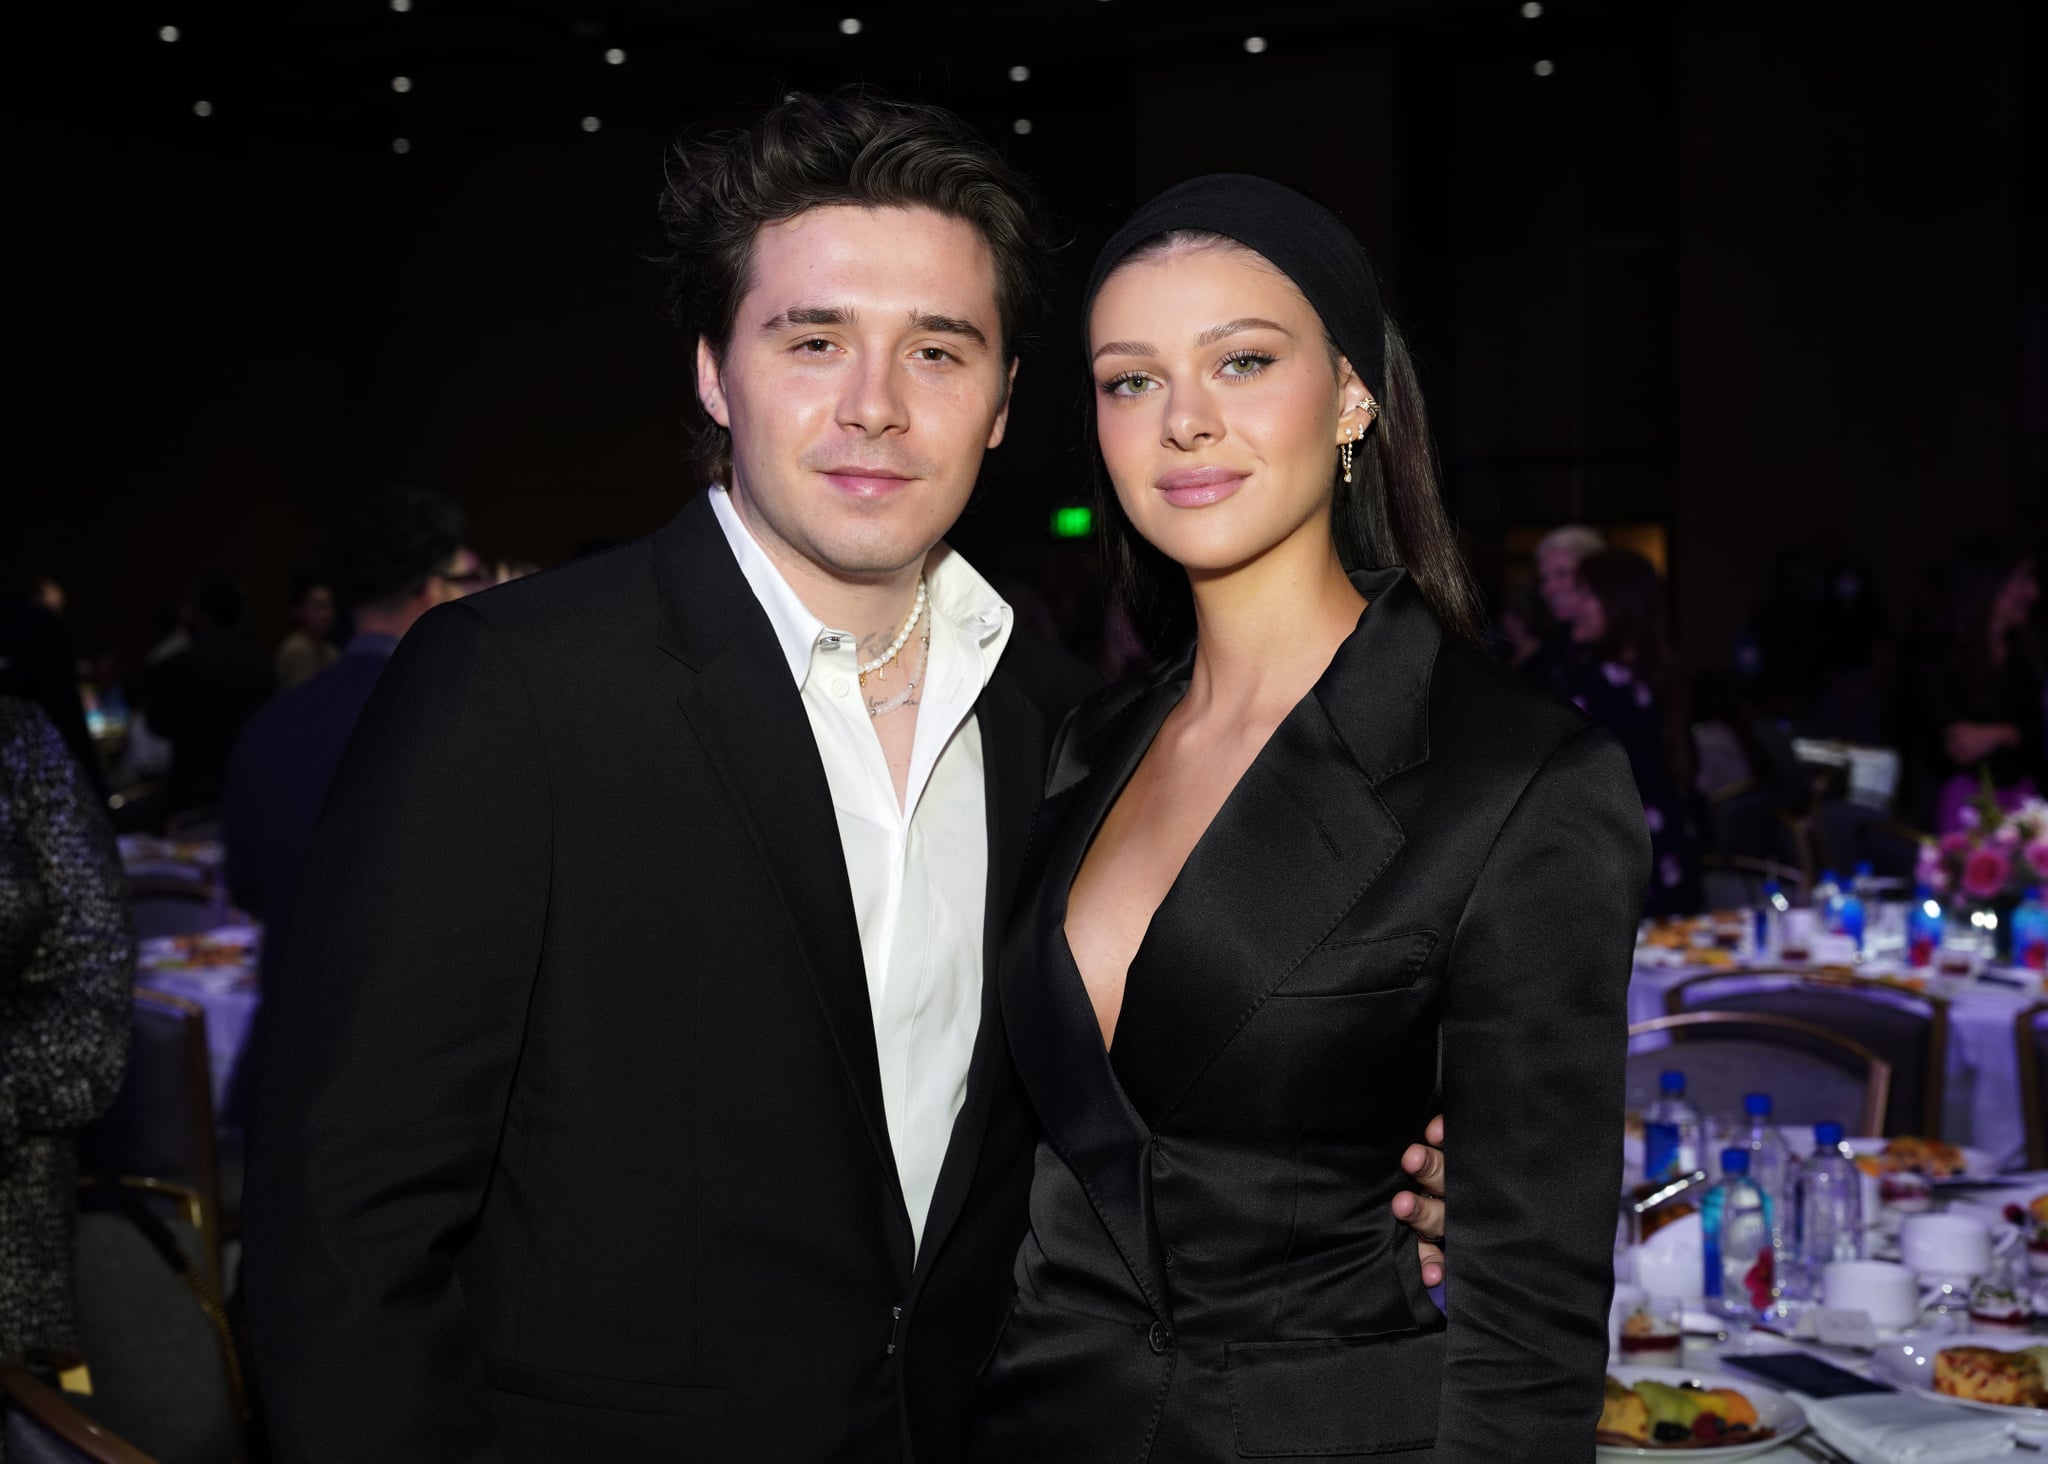 LOS ANGELES, CALIFORNIA - DECEMBER 07: (L-R) Brooklyn Beckham and Nicola Peltz attend The Hollywood Reporter 2022 Power 100 Women in Entertainment presented by Lifetime at Fairmont Century Plaza on December 07, 2022 in Los Angeles, California. (Photo by Presley Ann/The Hollywood Reporter via Getty Images)